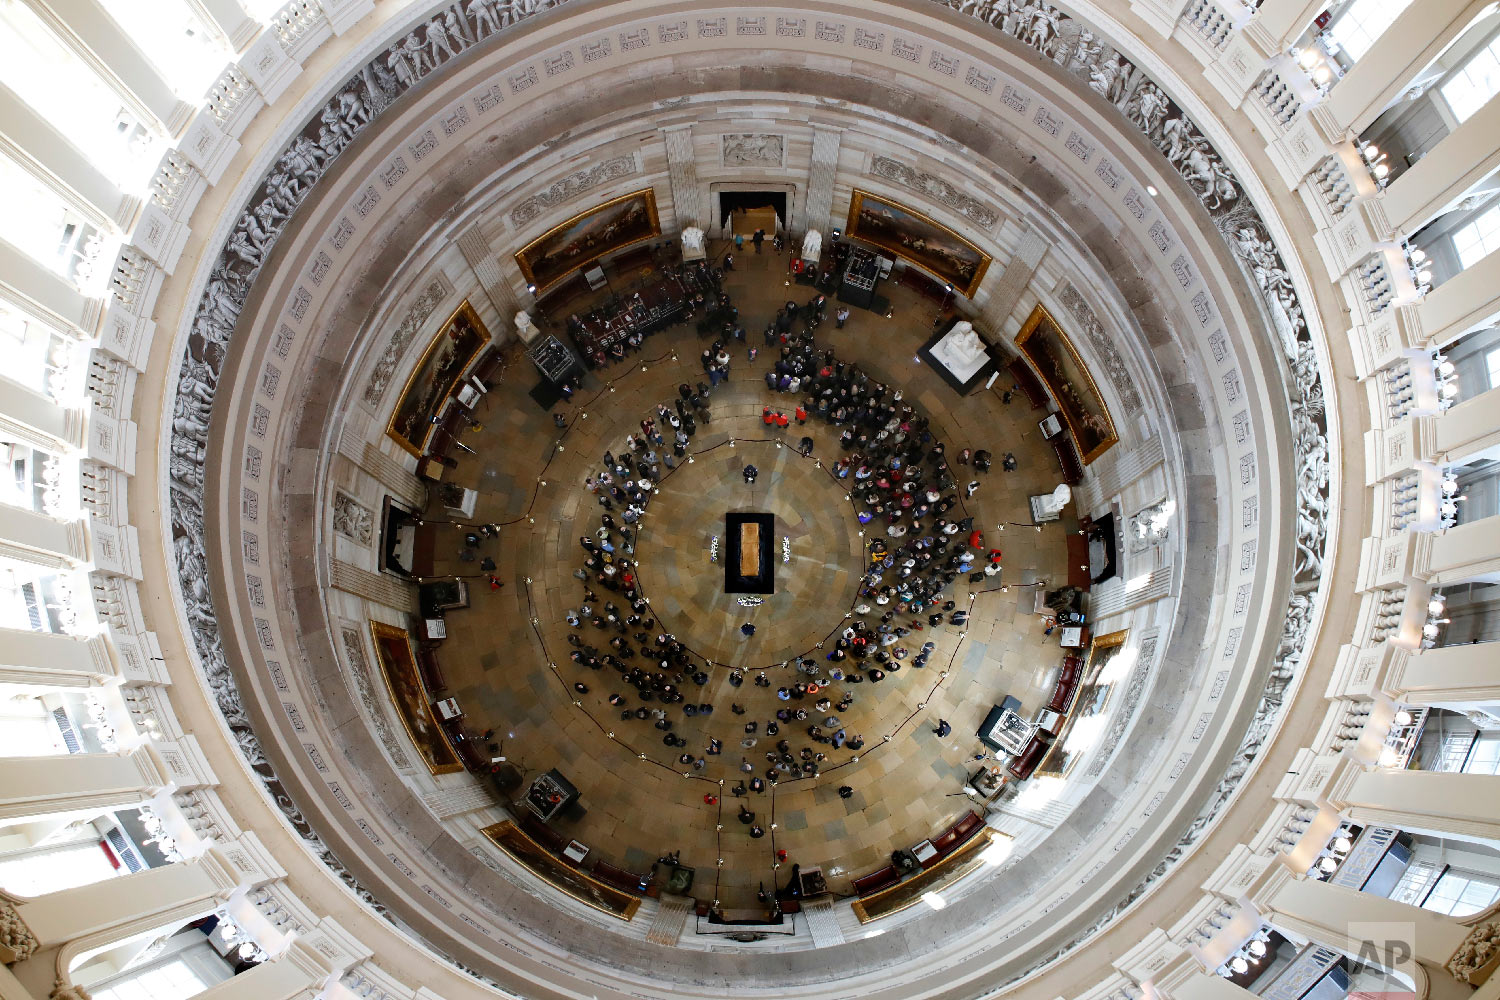  Visitors pay their respects as the casket of the Rev. Billy Graham lies in honor at the Rotunda of the U.S. Capitol Building in Washington on Feb. 28, 2018. (AP Photo/Jacquelyn Martin) 